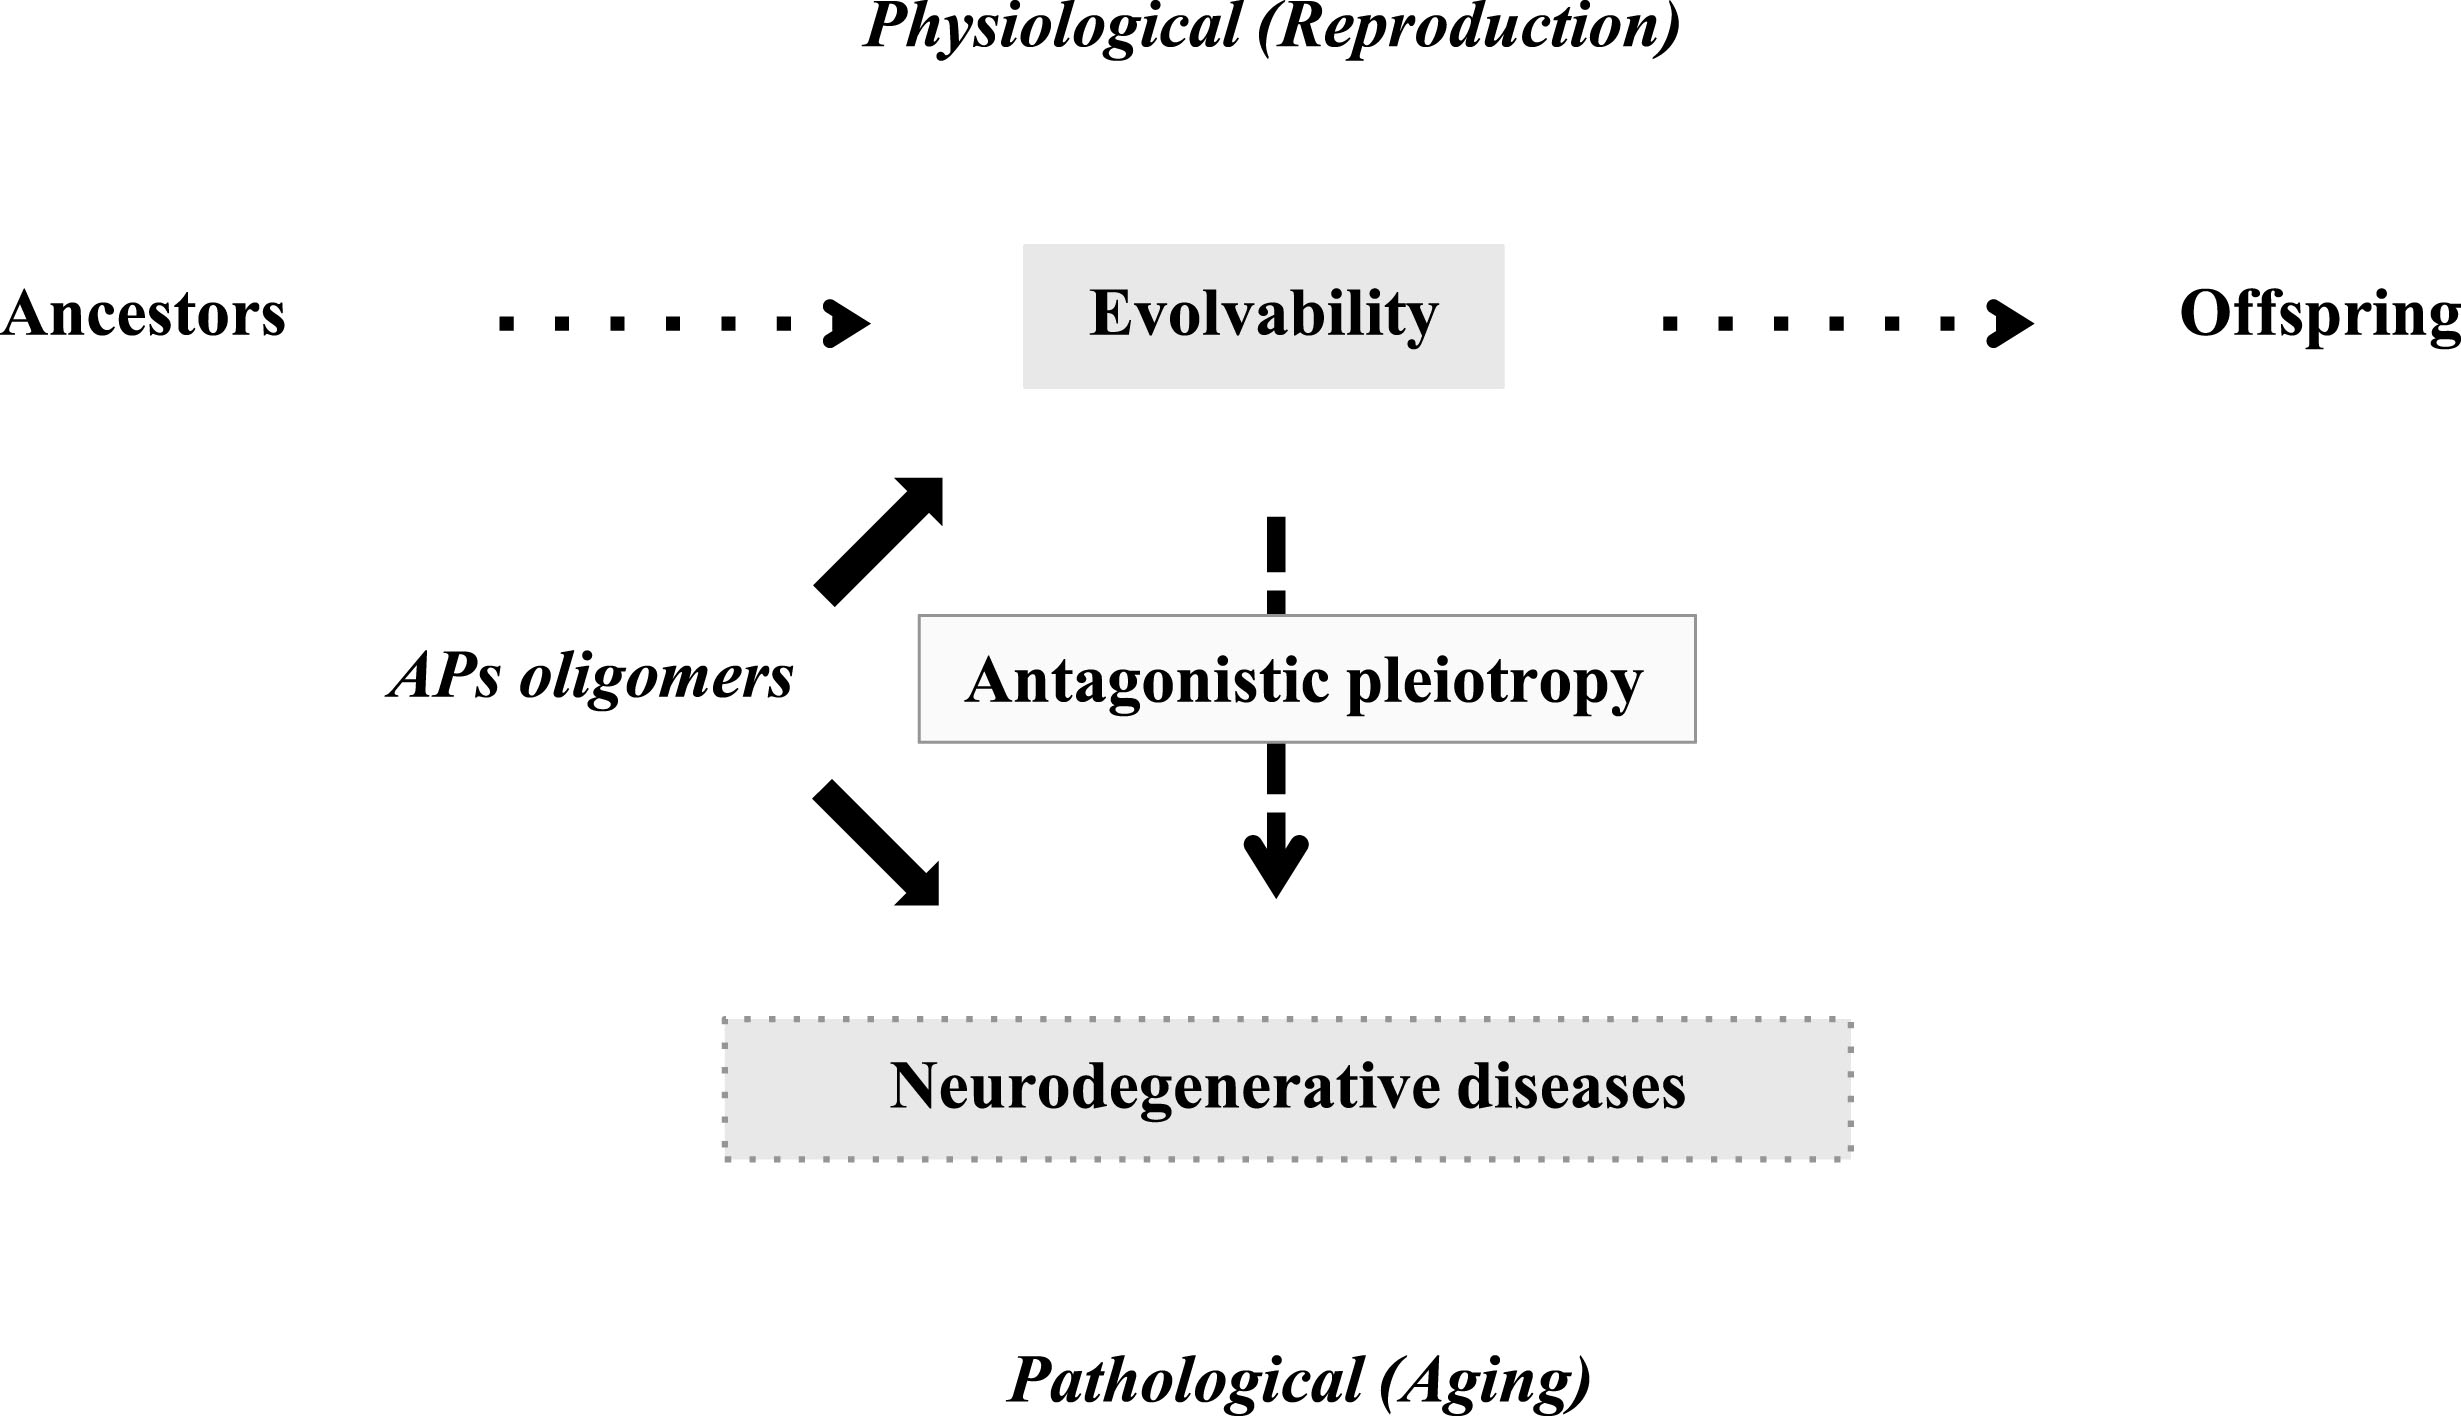 Schematics of the pathophysiology of APs in human brain. Evolvability is supposed to be a physiological phenomenon during reproduction, whereas neurodegenerative diseases are pathological phenomena during the post-reproductive senescent period. Both are derived from the aggregates of APs and participate in an antagonistic pleiotropy relationship as illustrated.